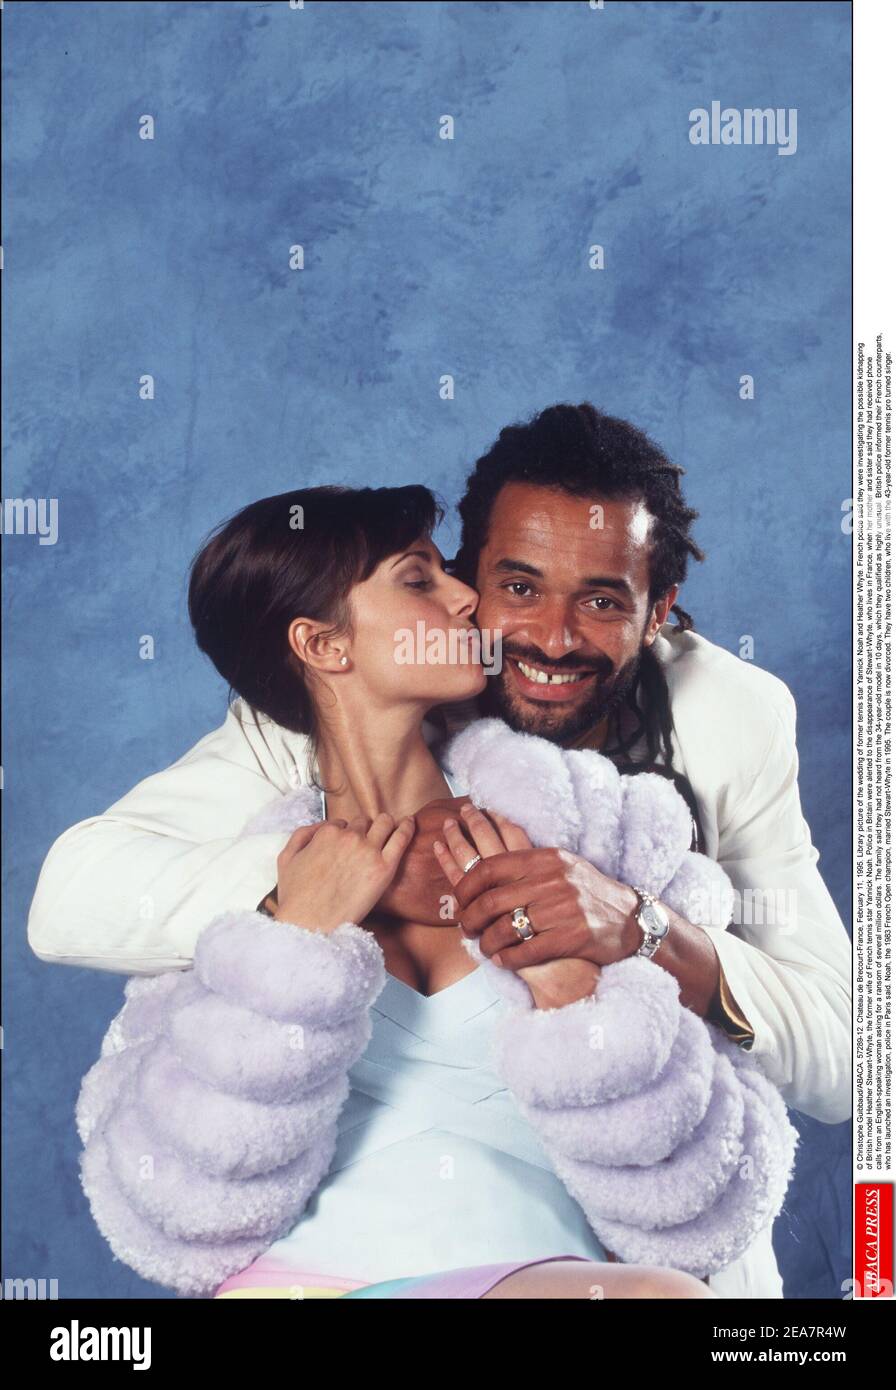 © Christophe Guibbaud/ABACA. 57289-12. Chateau de Brecourt-France, February 11, 1995. Library picture of the wedding of former tennis star Yannick Noah and Heather Whyte. French police said they were investigating the possible kidnapping of British model Heather Stewart-Whyte, the former wife of French tennis star Yannick Noah. Police in Britain were alerted to the disappearance of Stewart-Whyte, who lives in France, when her mother and sister said they had received phone calls from an English-speaking woman asking for a ransom of several million dollars. The family said they had not heard fro Stock Photo